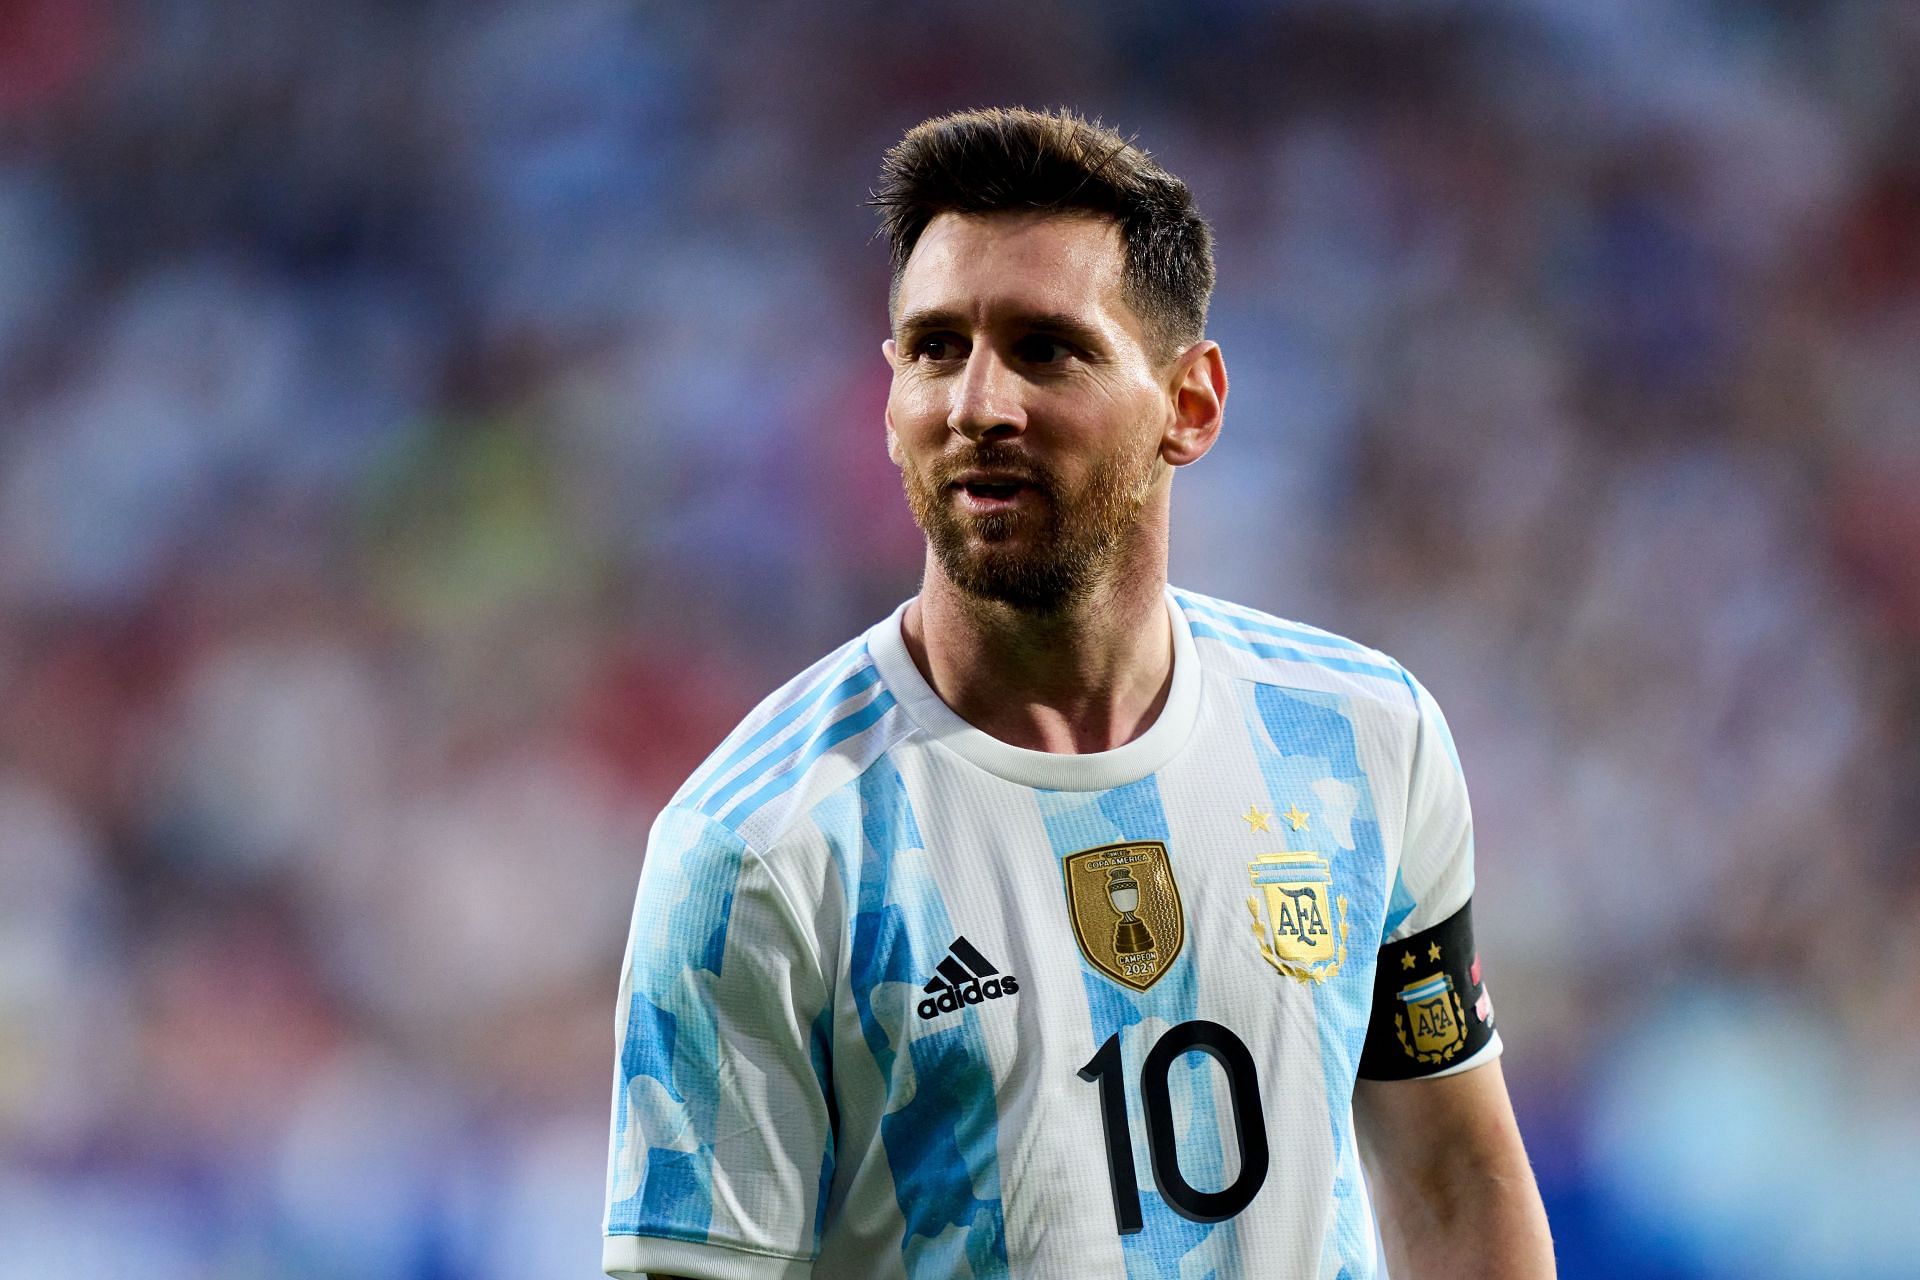 Lionel Messi could move to the MLS once his contract at the Parc des Princes expires.